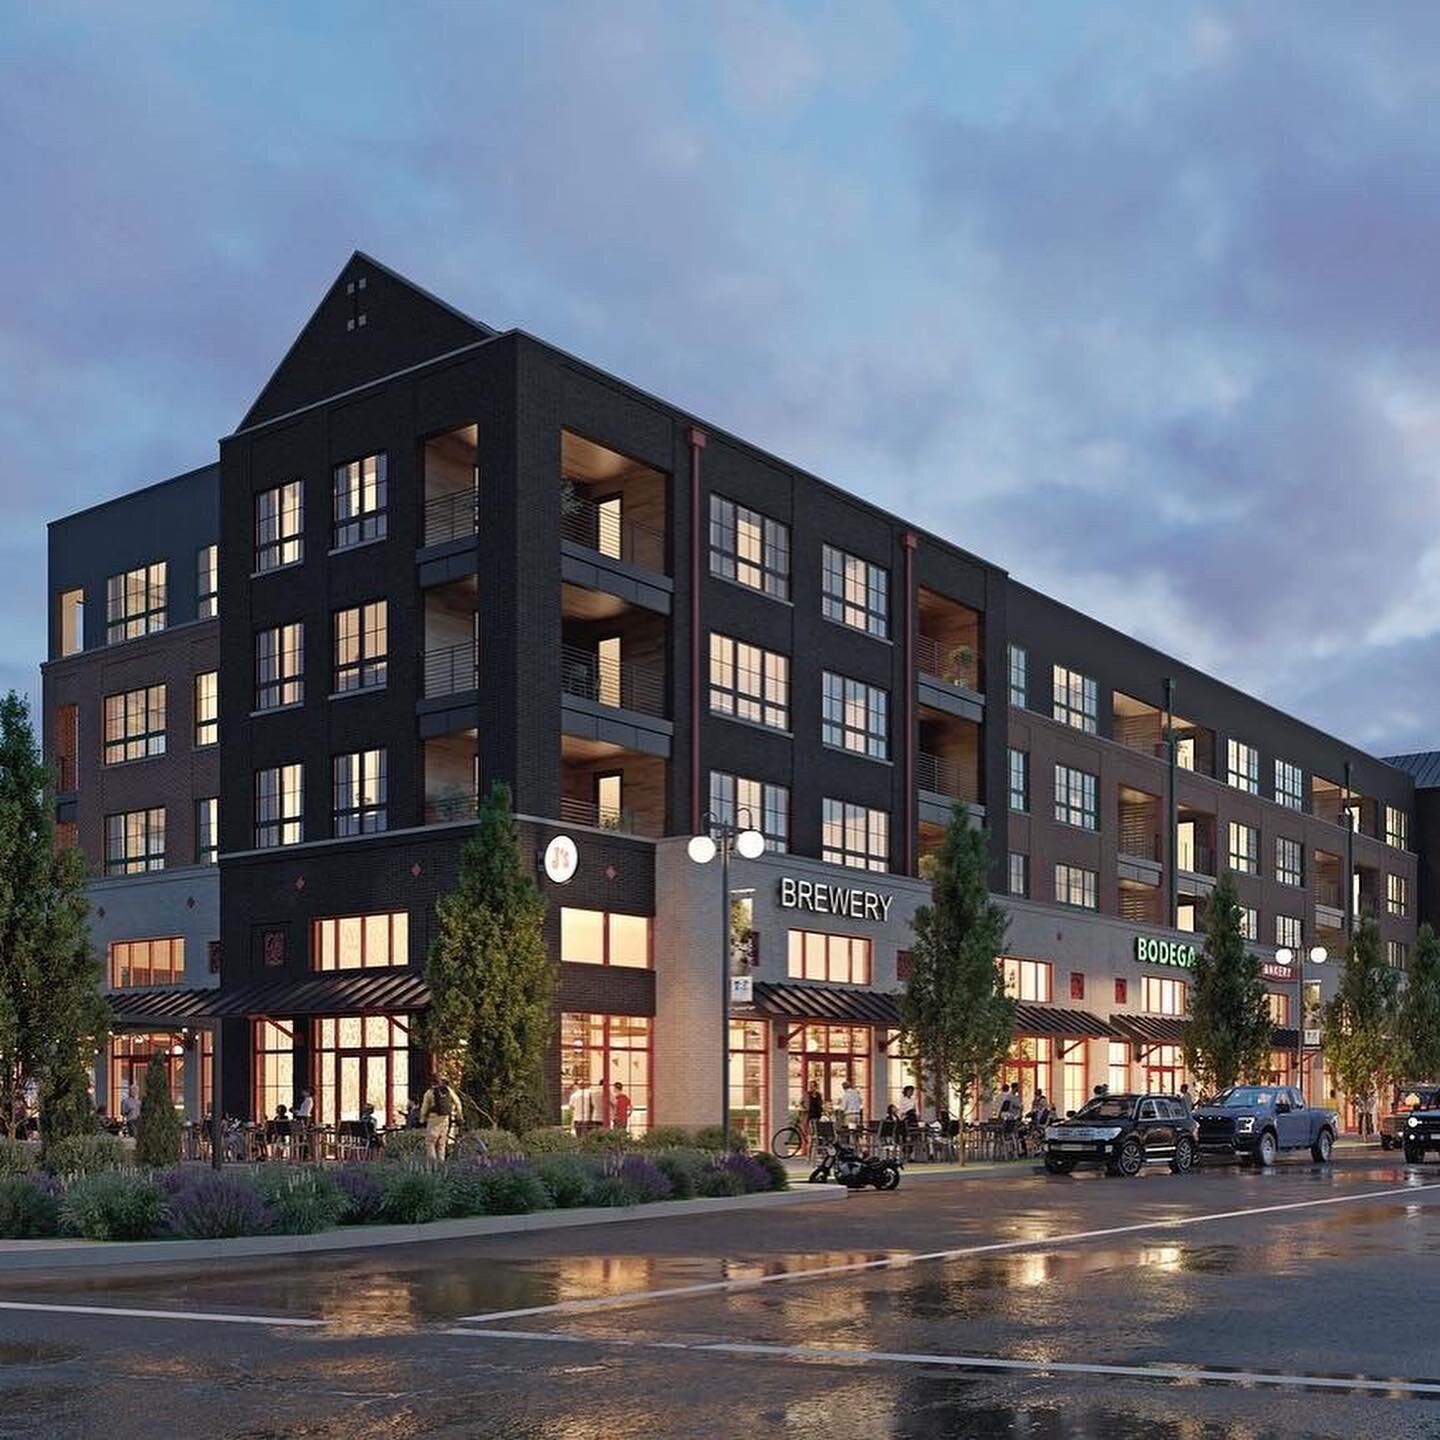 For this weeks Friday Feature we are happy to introduce one of our newest projects, Hobbs Station!

Friday Feature: Hobbs Station
 
Location: Plainfield, Indiana
Scale: 616,609 SF
Program: Mixed-Use / Multi-family Apartments / Retail / Commercial / P